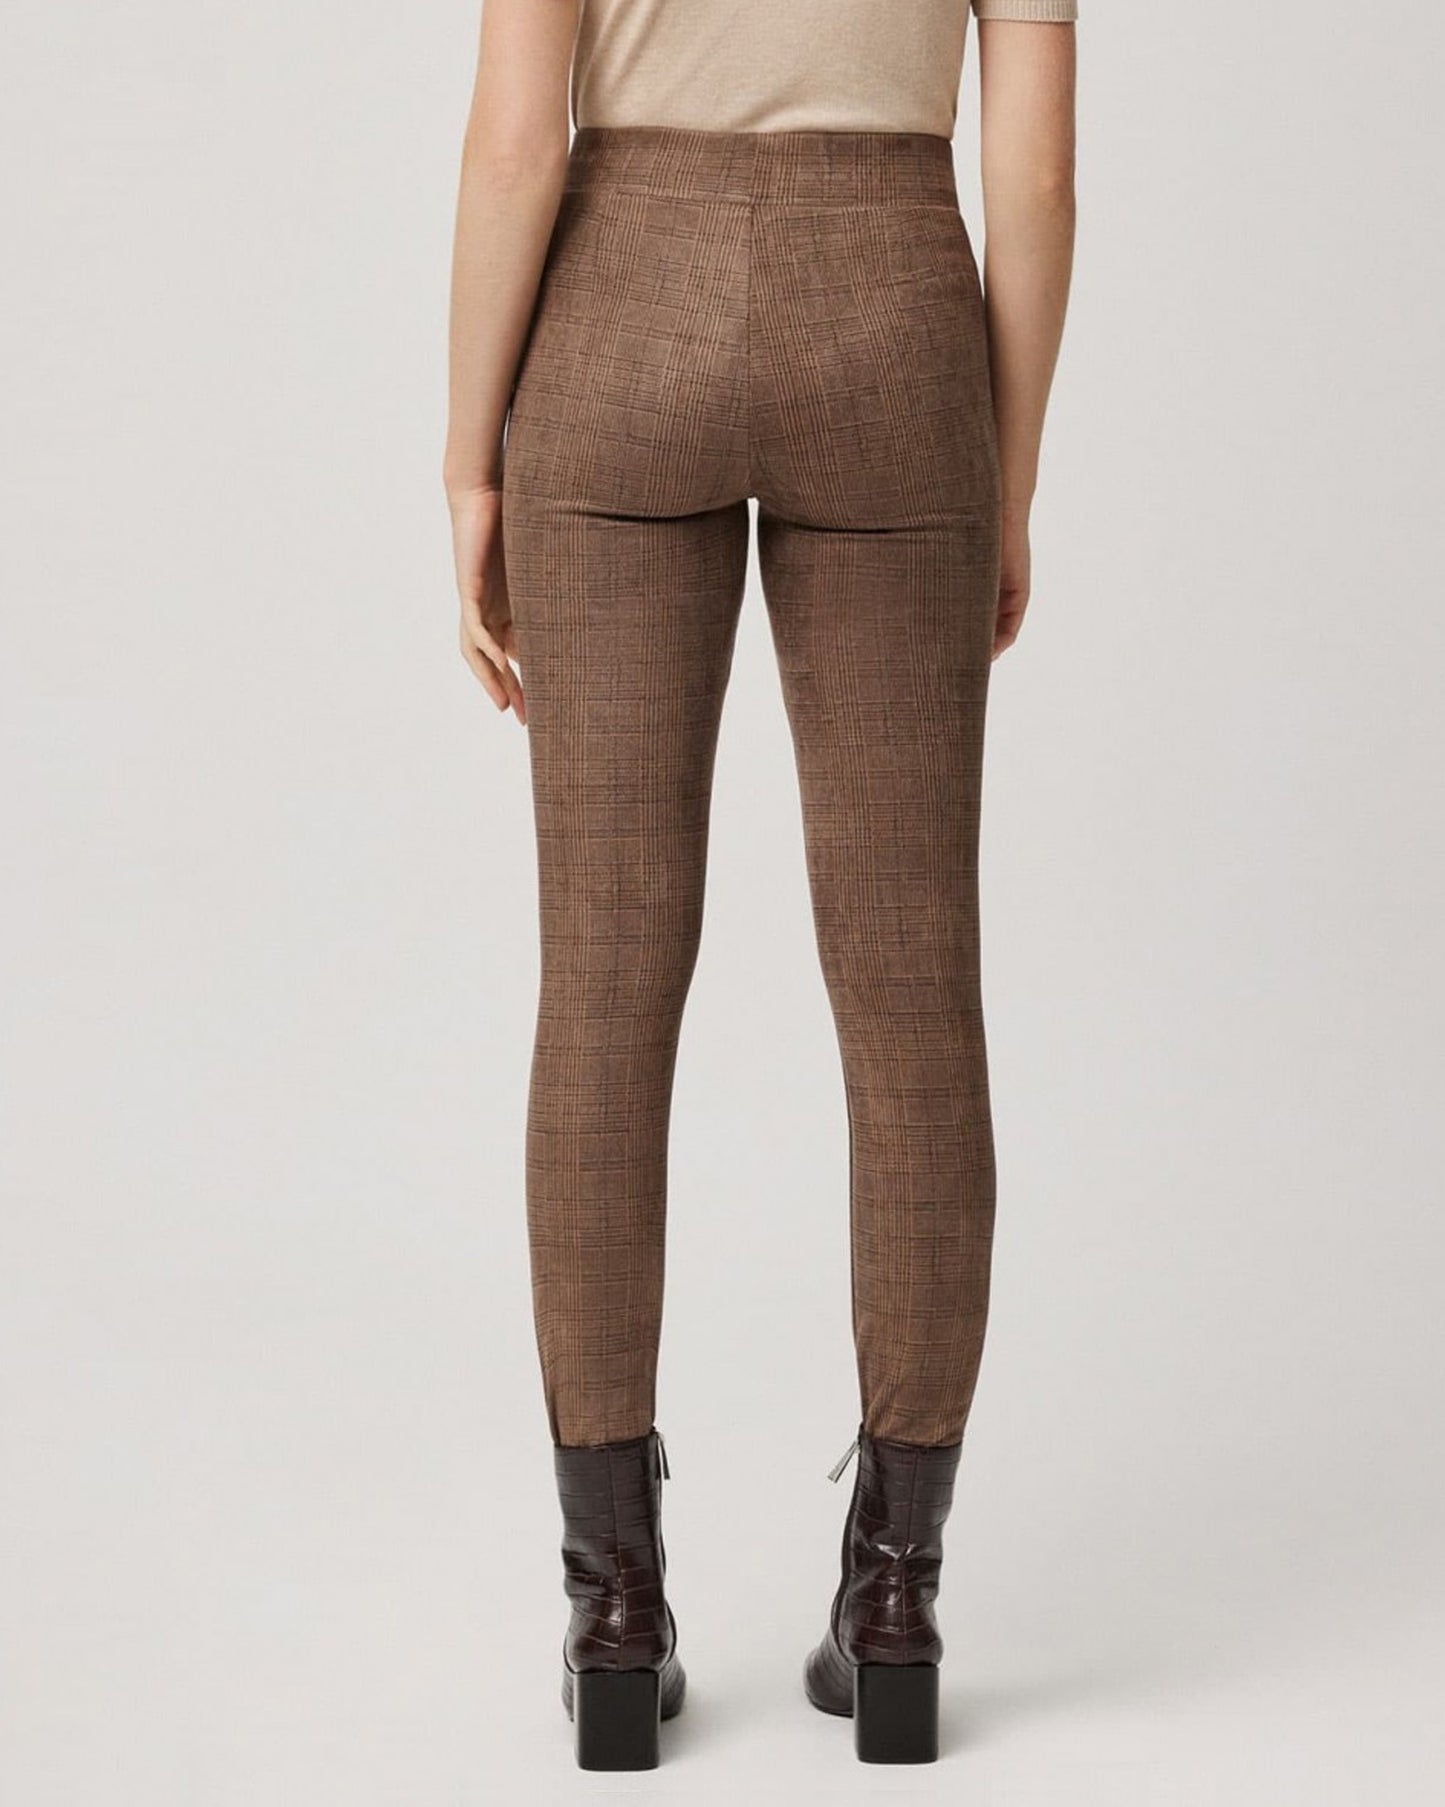 Ysabel Mora 70157 Brown Tartan Leggings - Light brown leggings with faux front pockets with covered buttons on the sides and deep elasticated waistband. Back view.